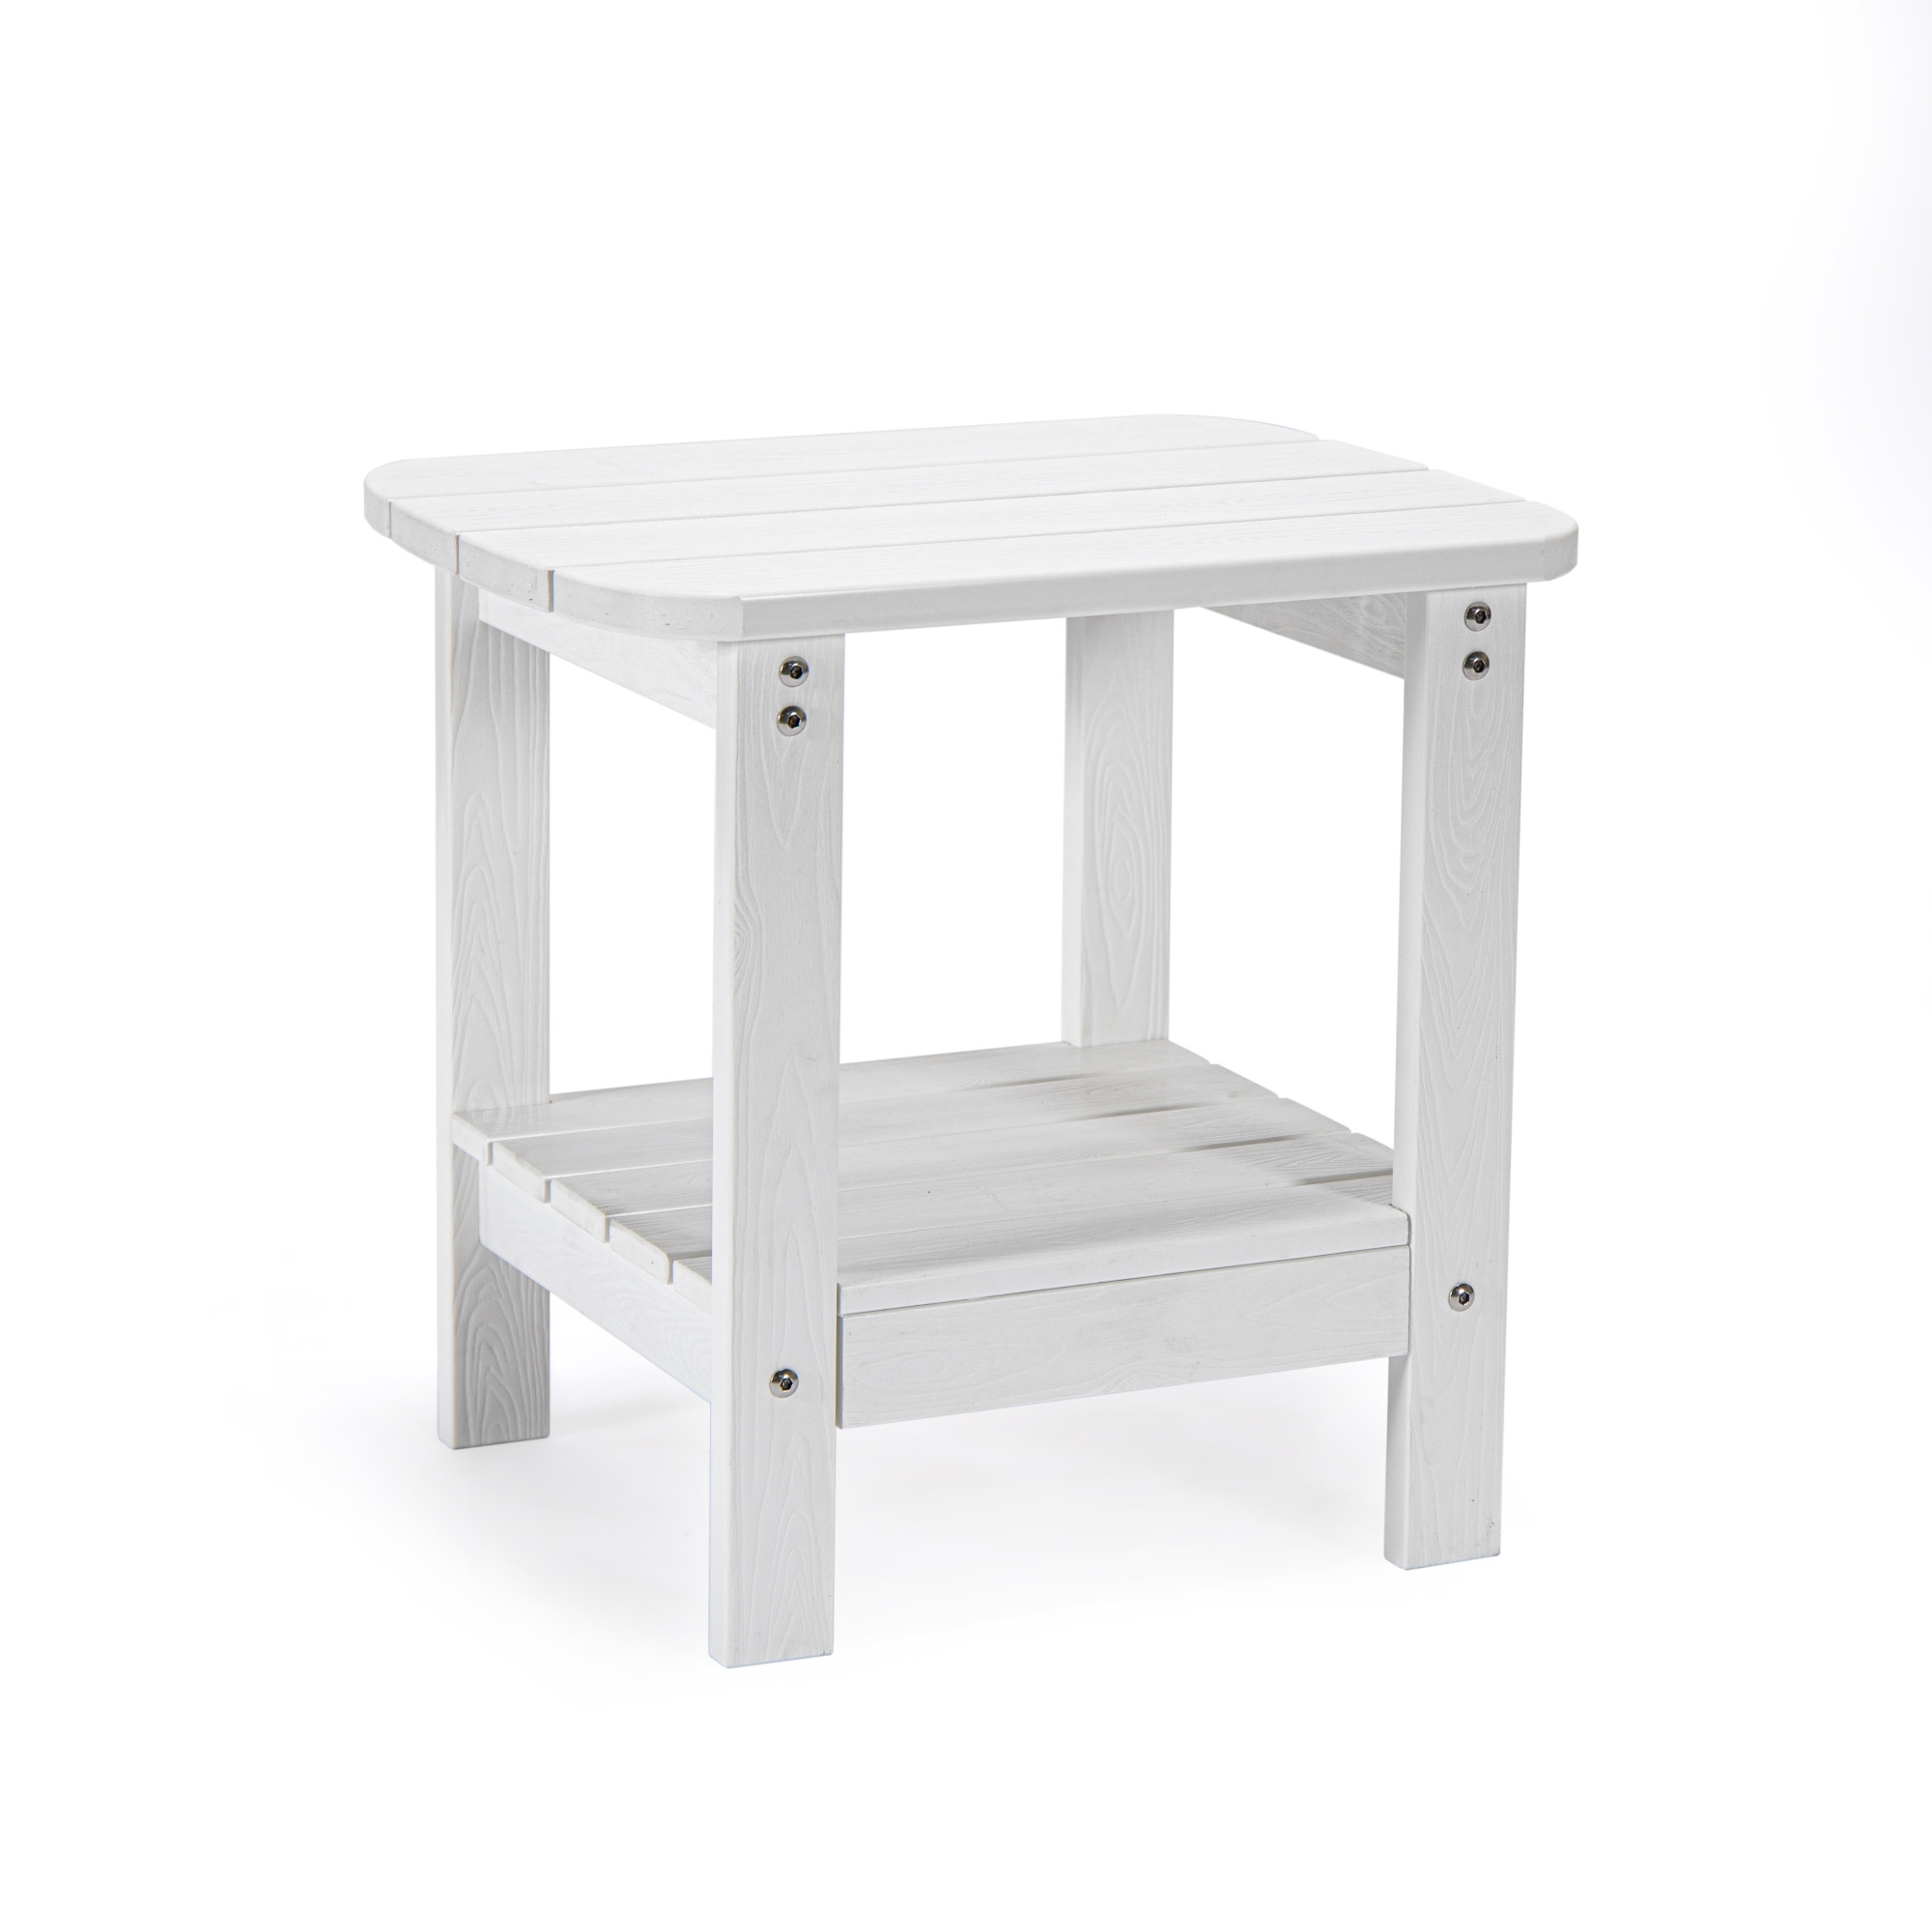 15" White Plastic Outdoor Side Table-543740-1